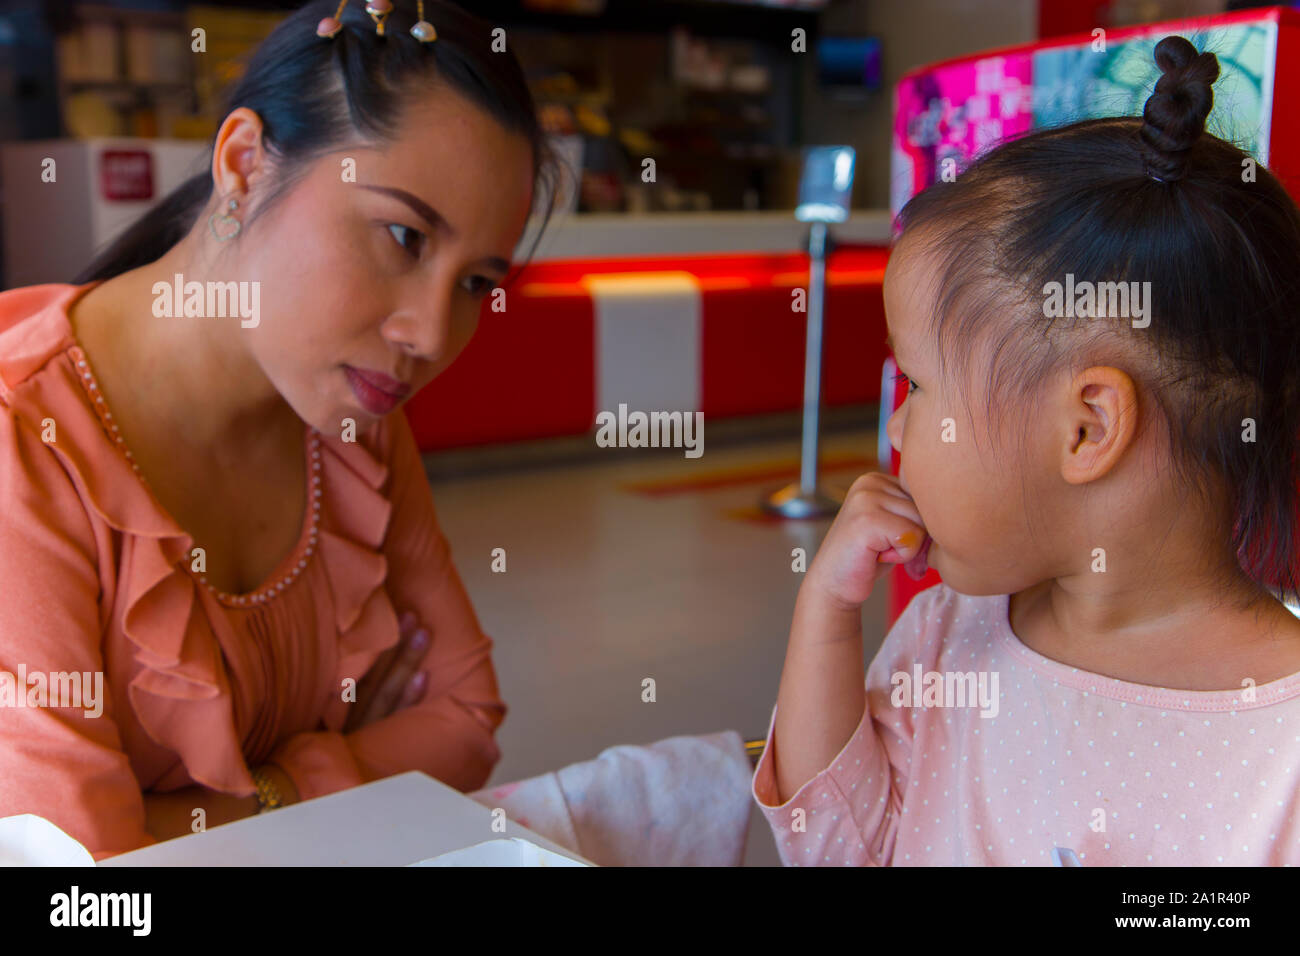 https://c8.alamy.com/comp/2A1R40P/angry-mom-with-her-child-looking-her-daughter-and-complaining-high-resolution-image-gallery-2A1R40P.jpg